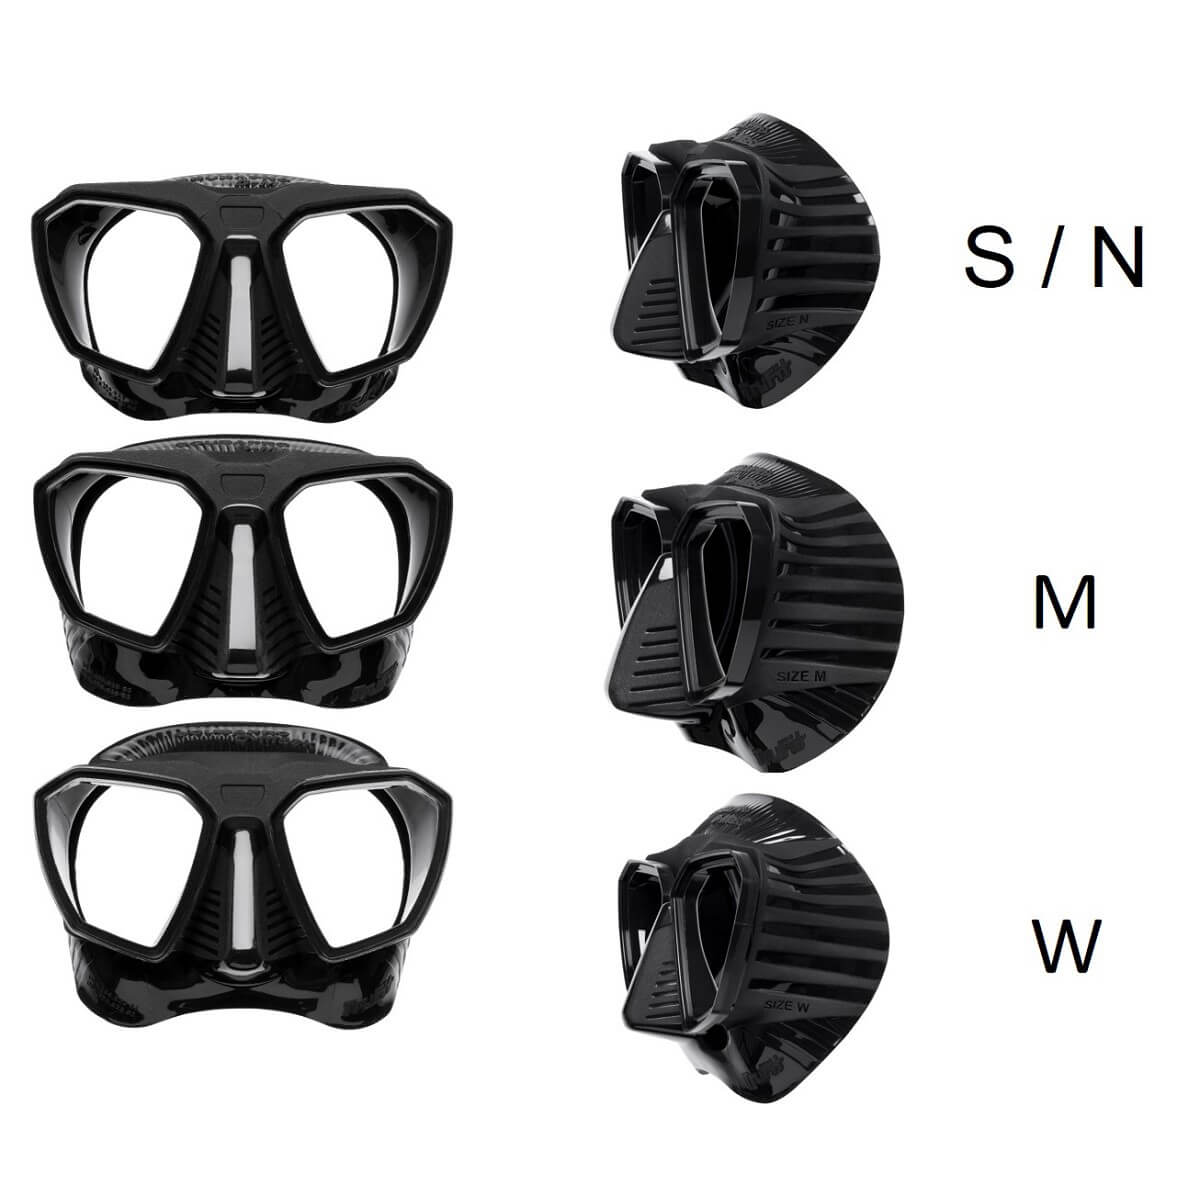 Scubapro Ghost White Mask Scuba Tech Diving Buy and Sales in